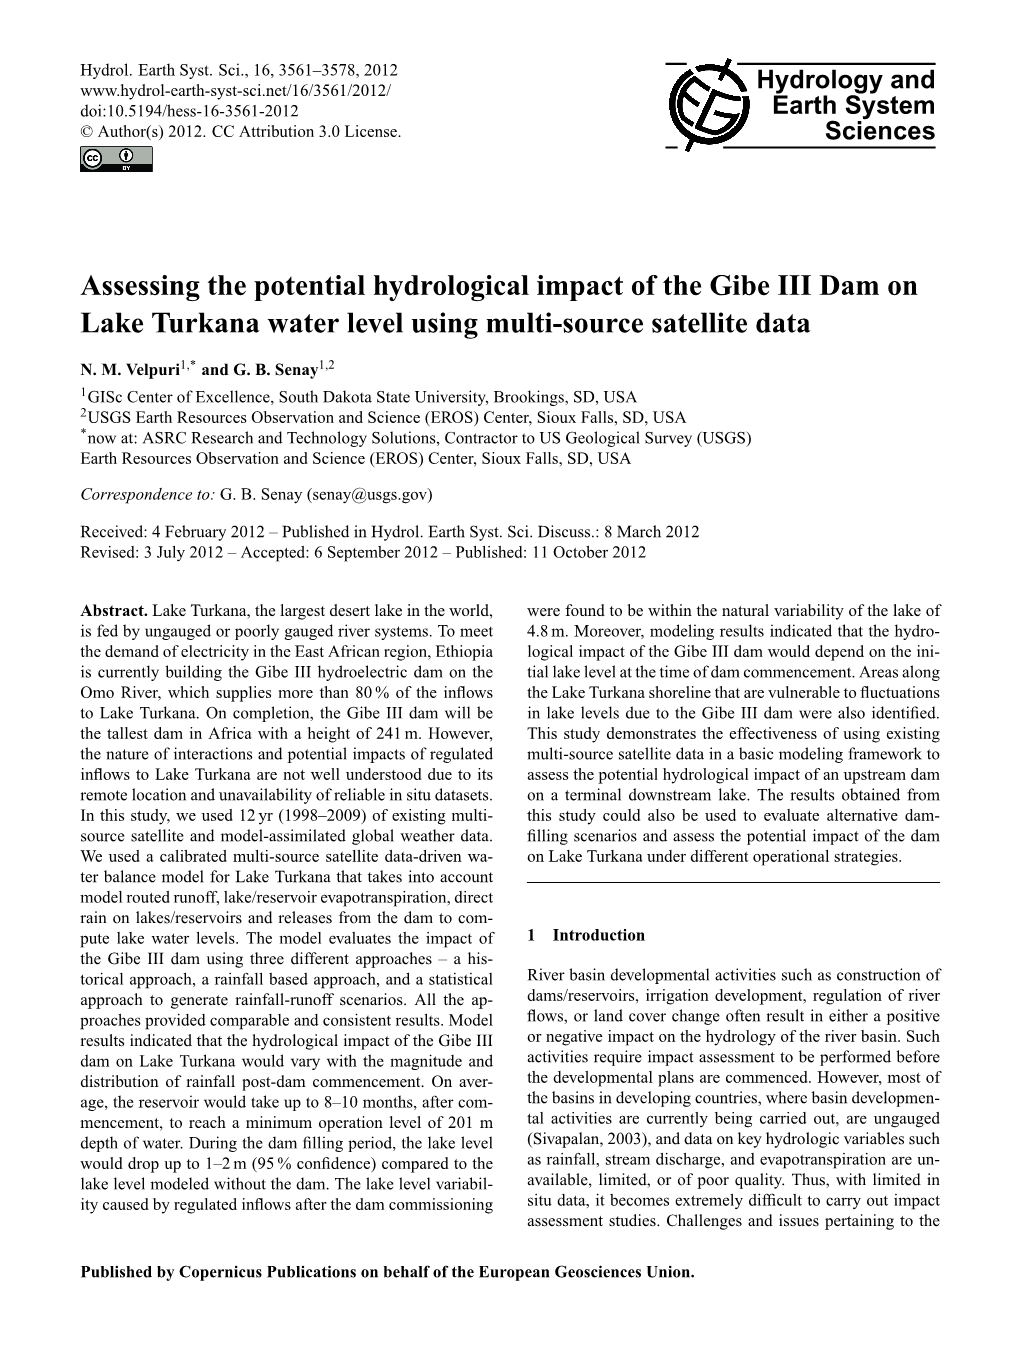 Assessing the Potential Hydrological Impact of the Gibe III Dam on Lake Turkana Water Level Using Multi-Source Satellite Data